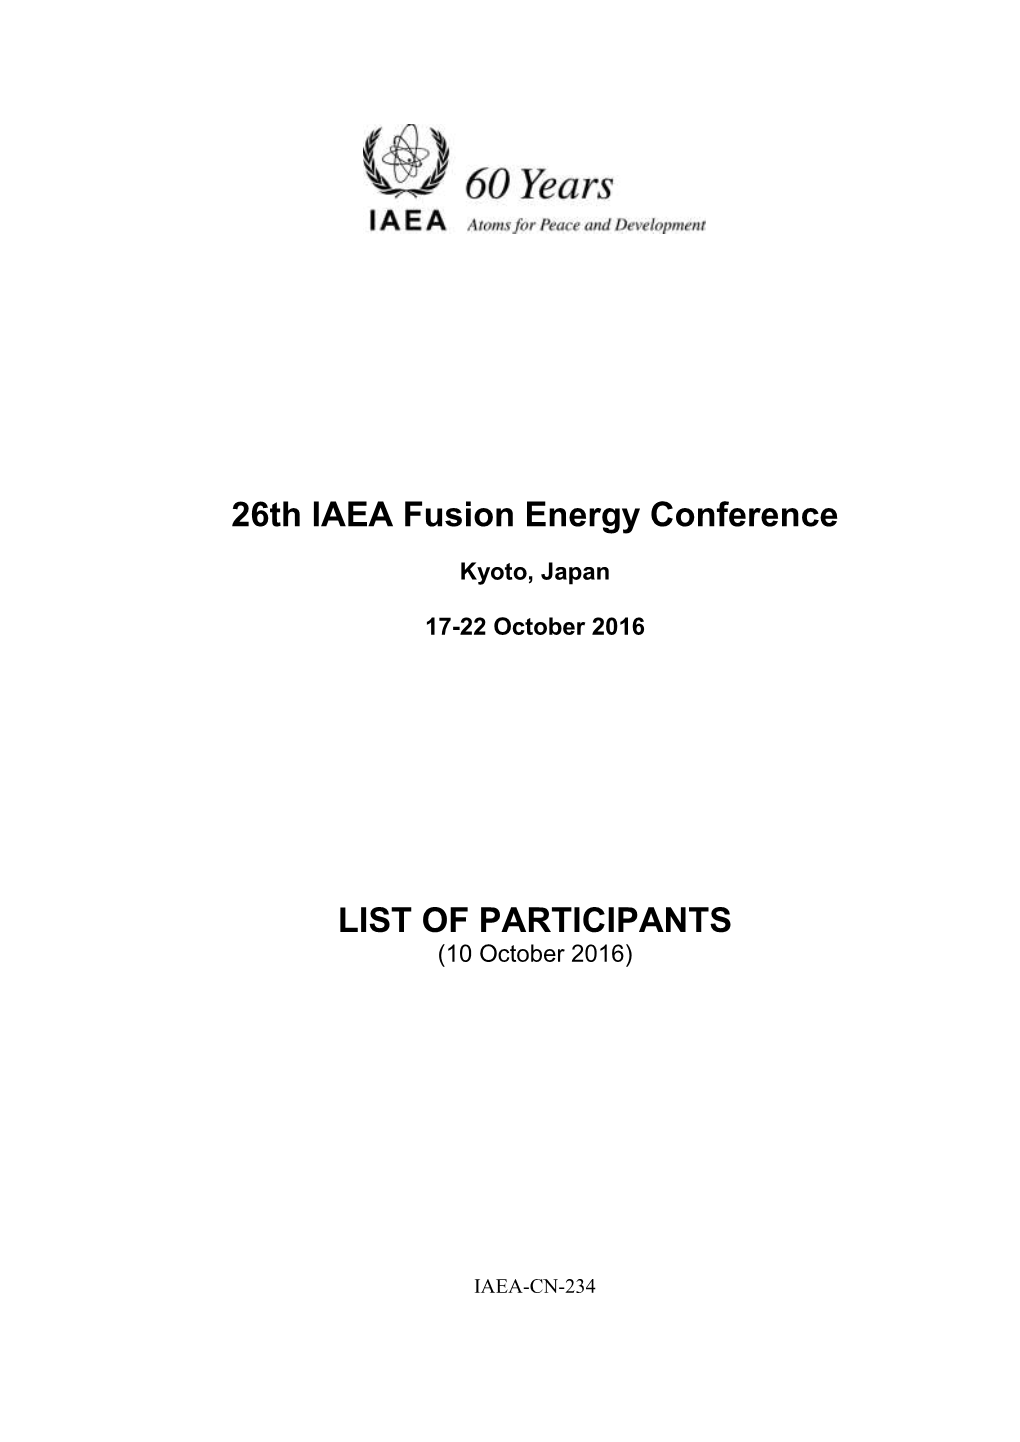 26Th IAEA Fusion Energy Conference LIST of PARTICIPANTS